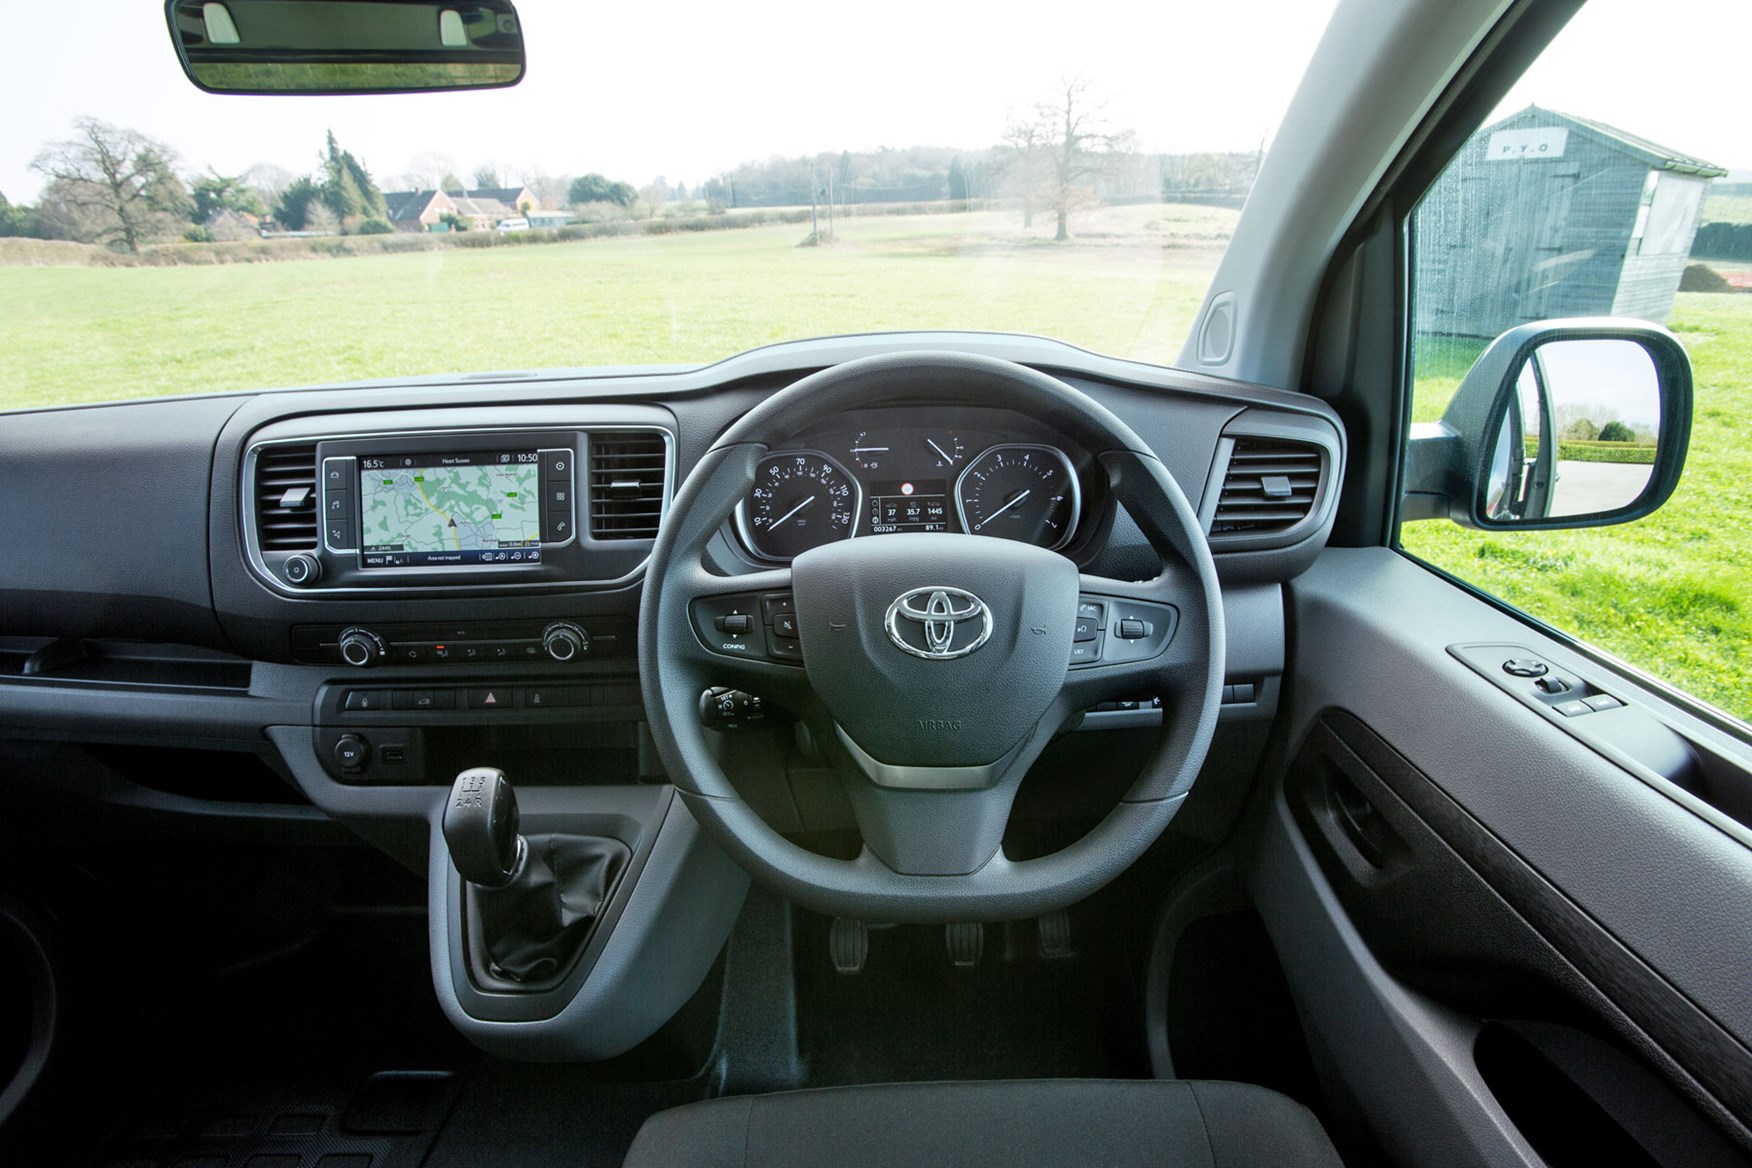 Toyota Proace review - cab interior, steering wheel, dials, infotainment, 2018